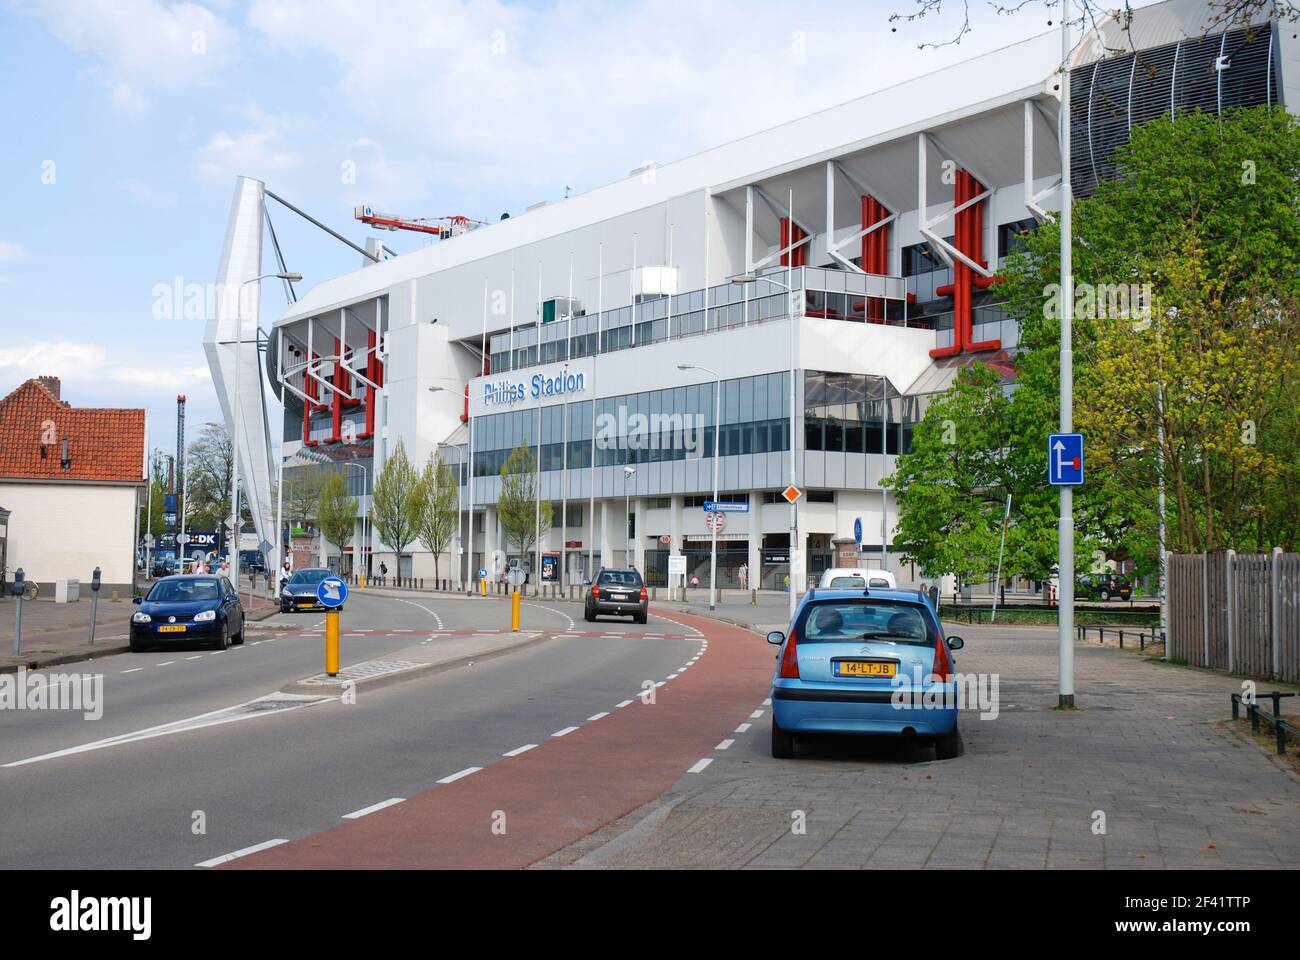 Eindhoven, Netherlands 04-11-2009 philips stadion architecture and traffic Stock Photo